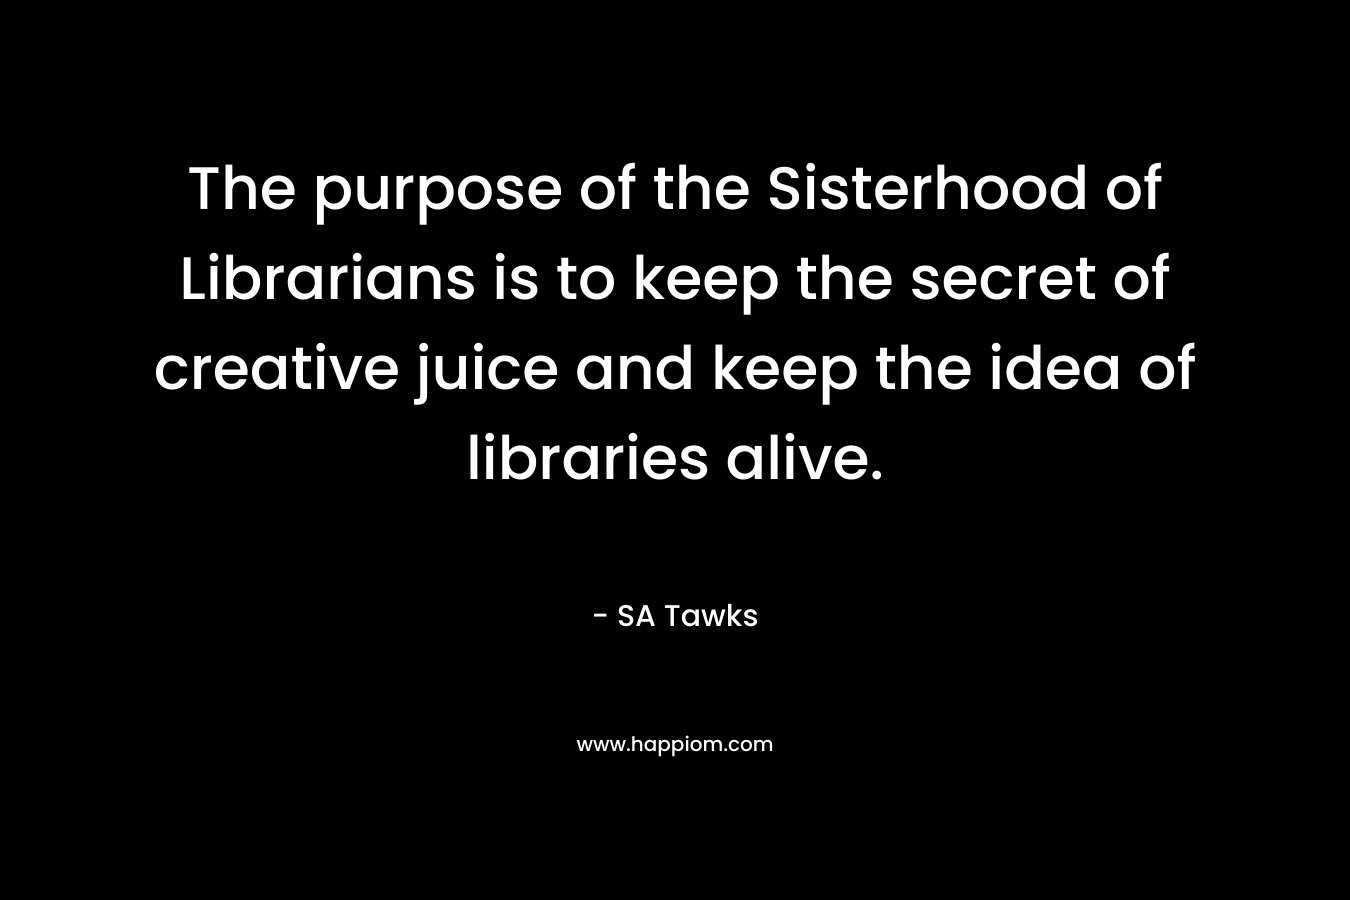 The purpose of the Sisterhood of Librarians is to keep the secret of creative juice and keep the idea of libraries alive. – SA Tawks